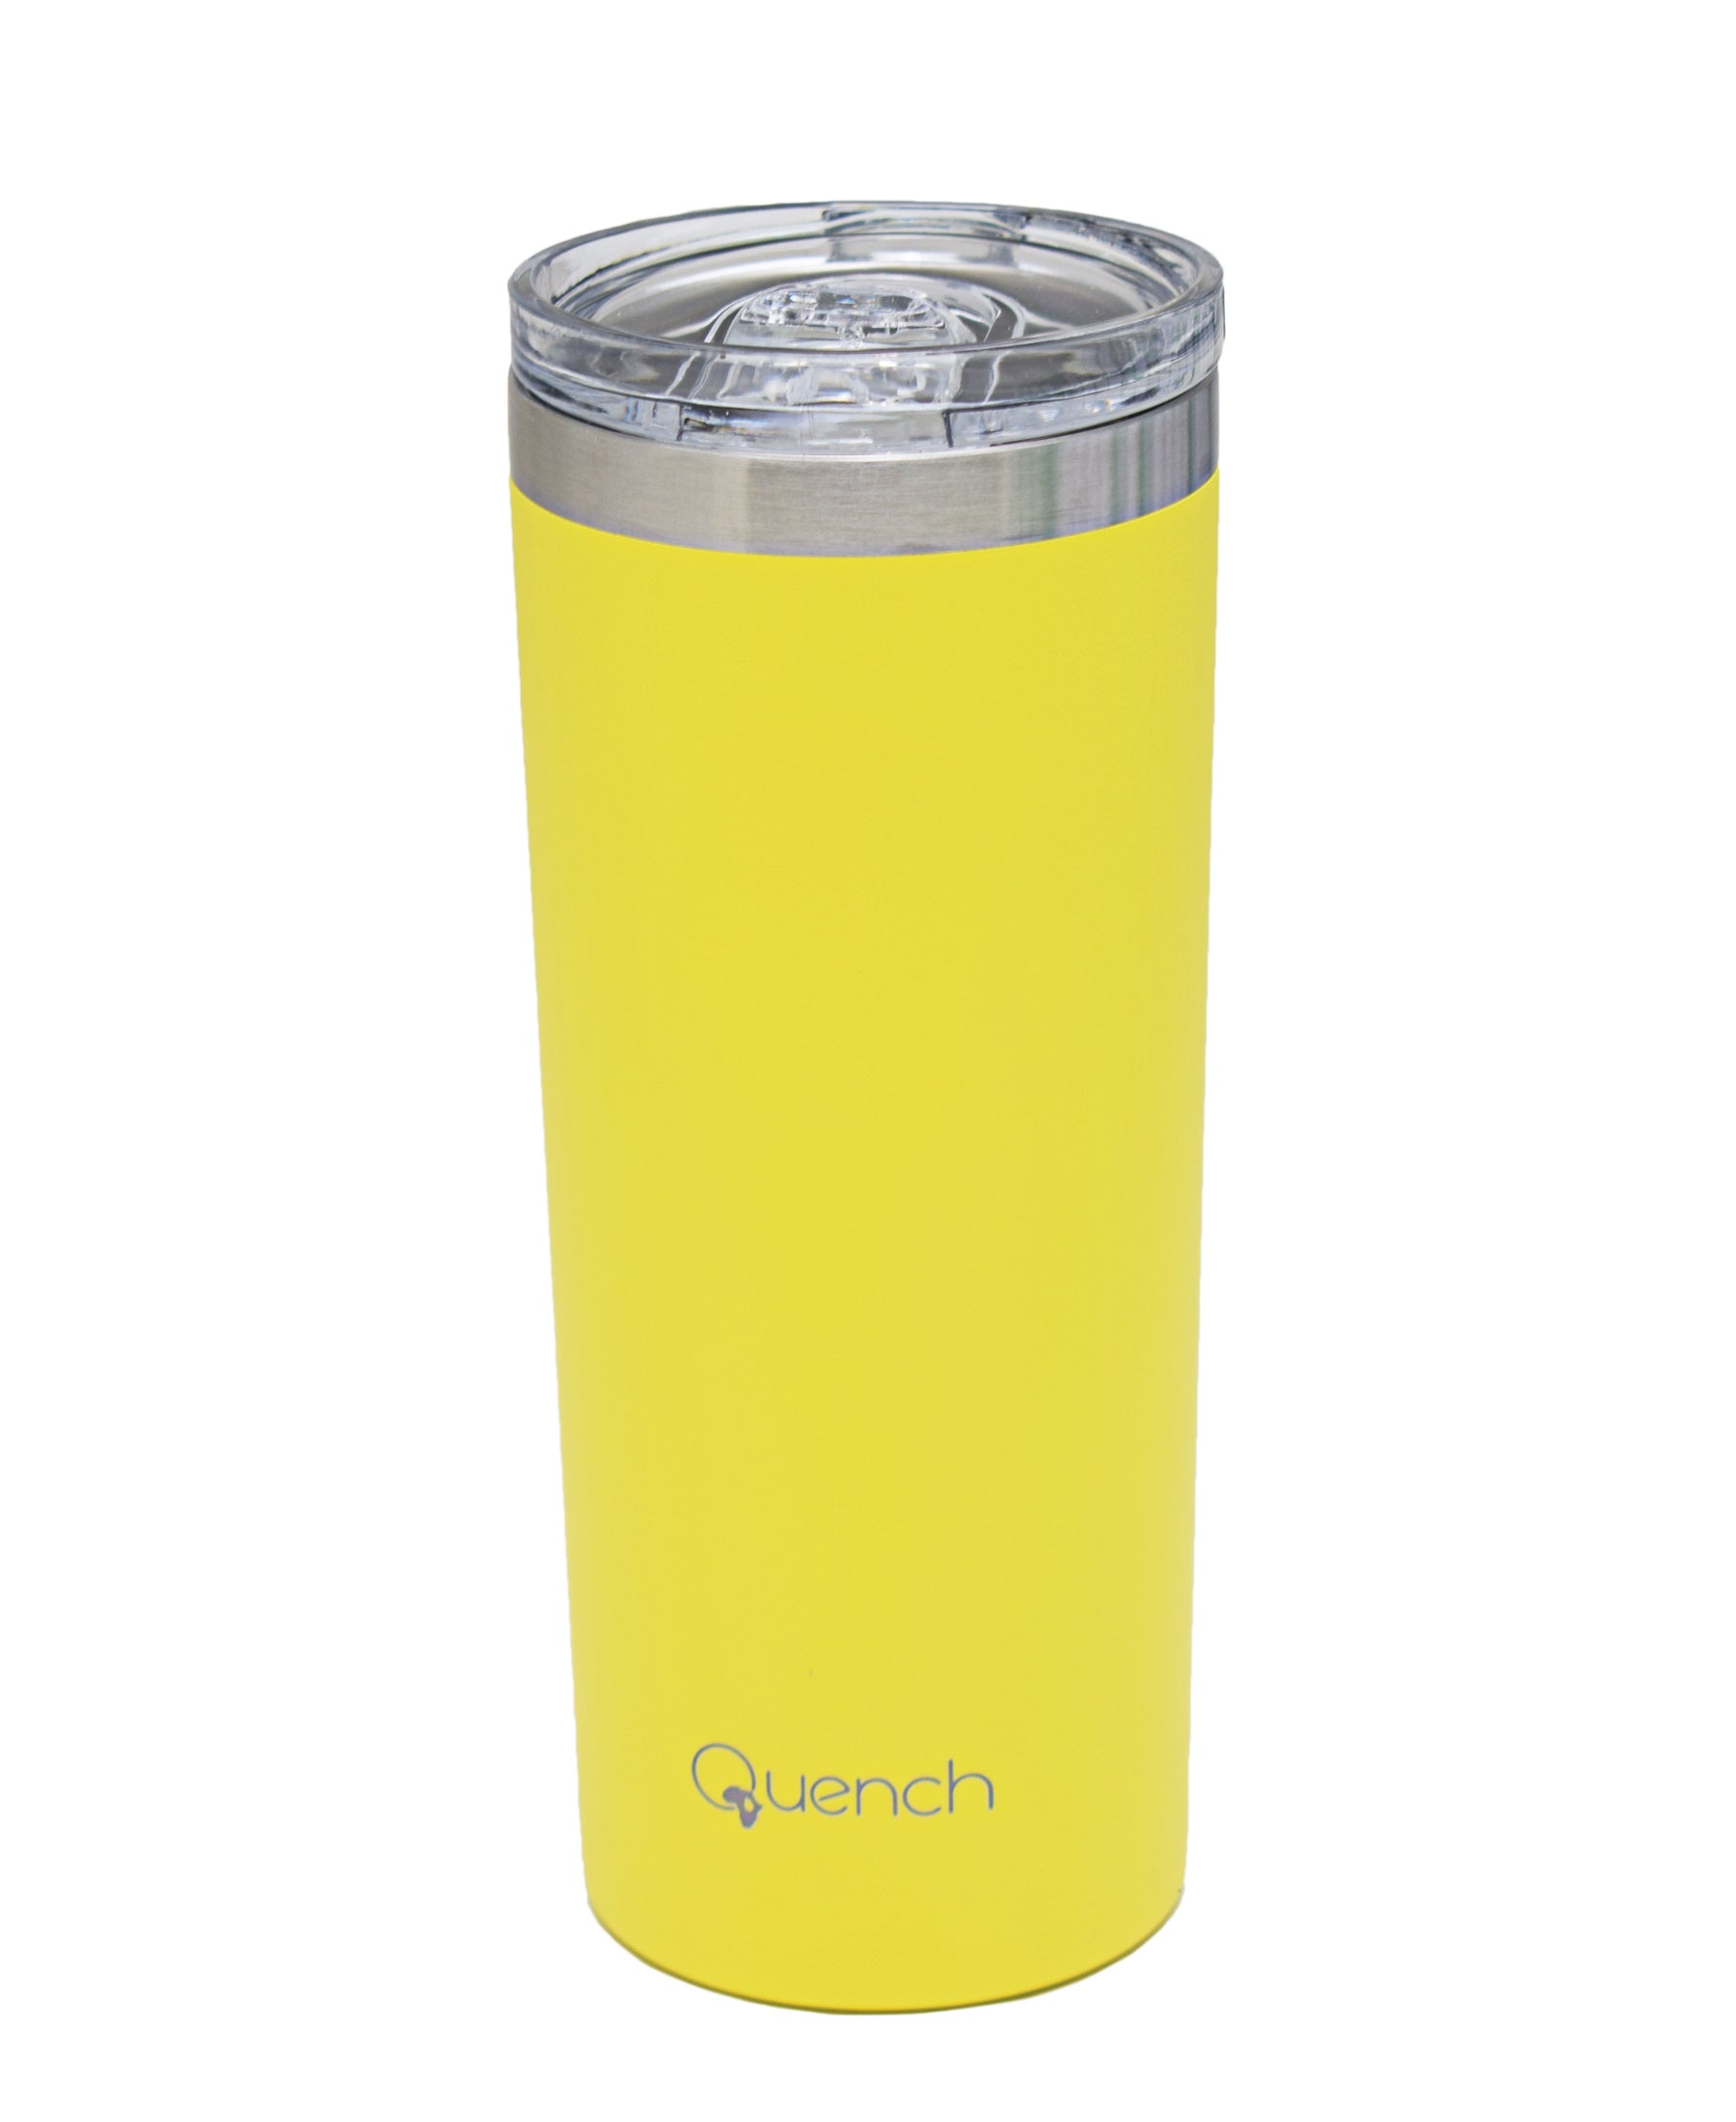 Quench 500ml Stainless Steel Travel Buddy - Sunshine Yellow